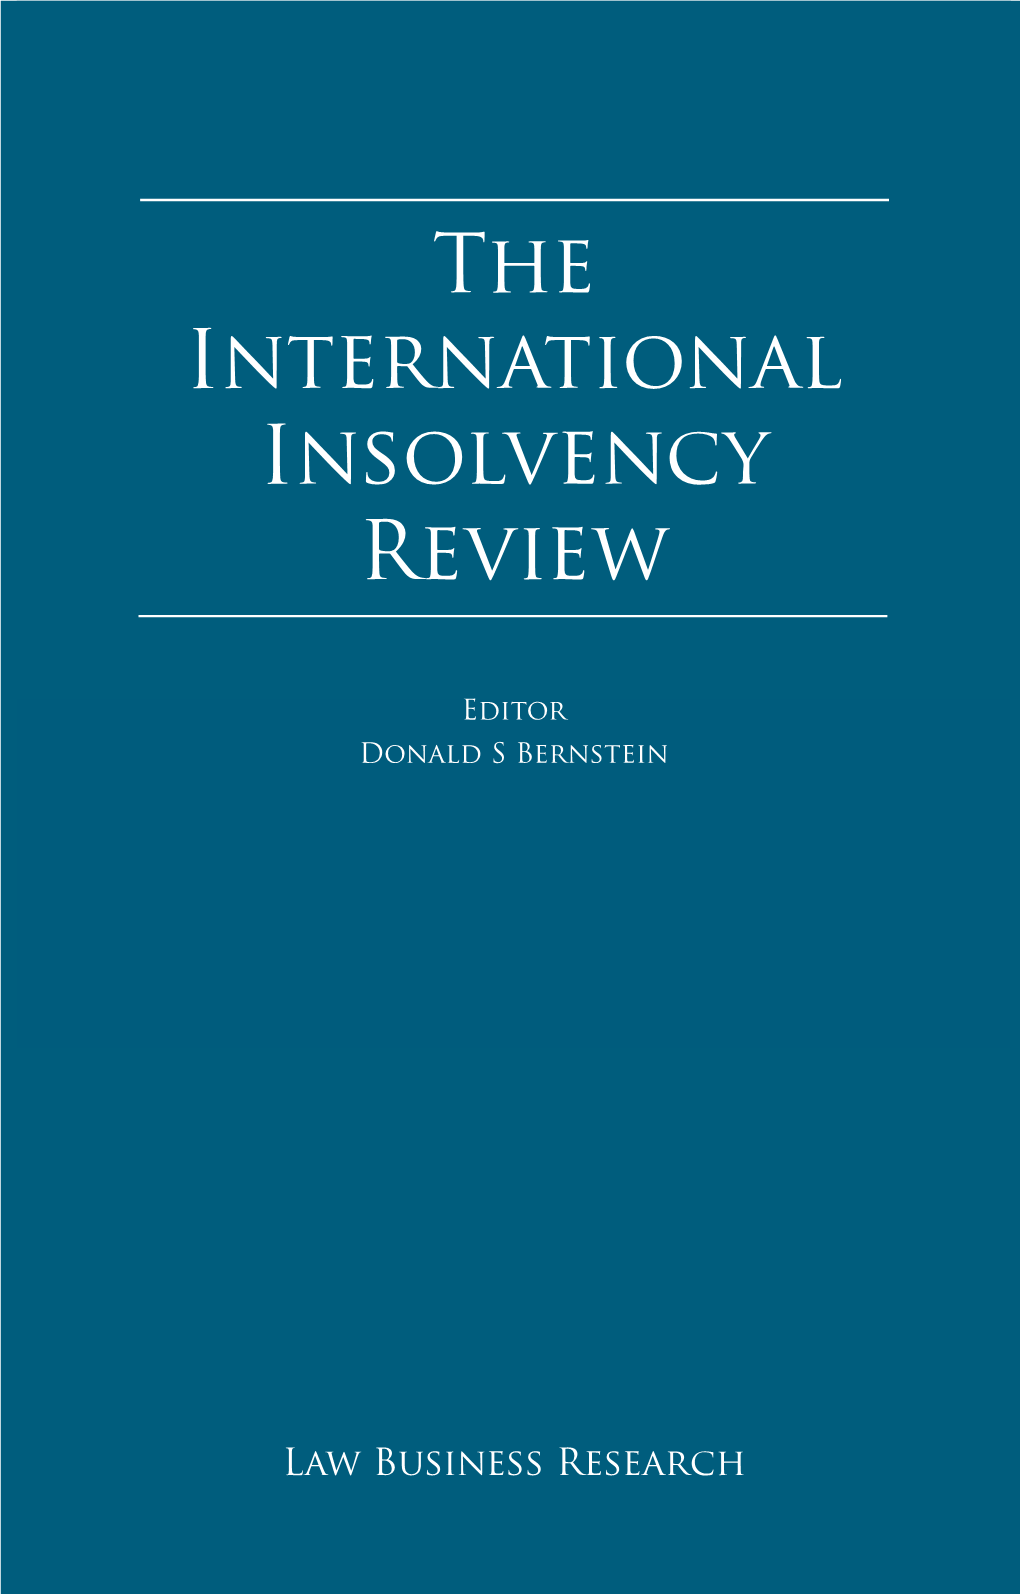 The International Insolvency Review